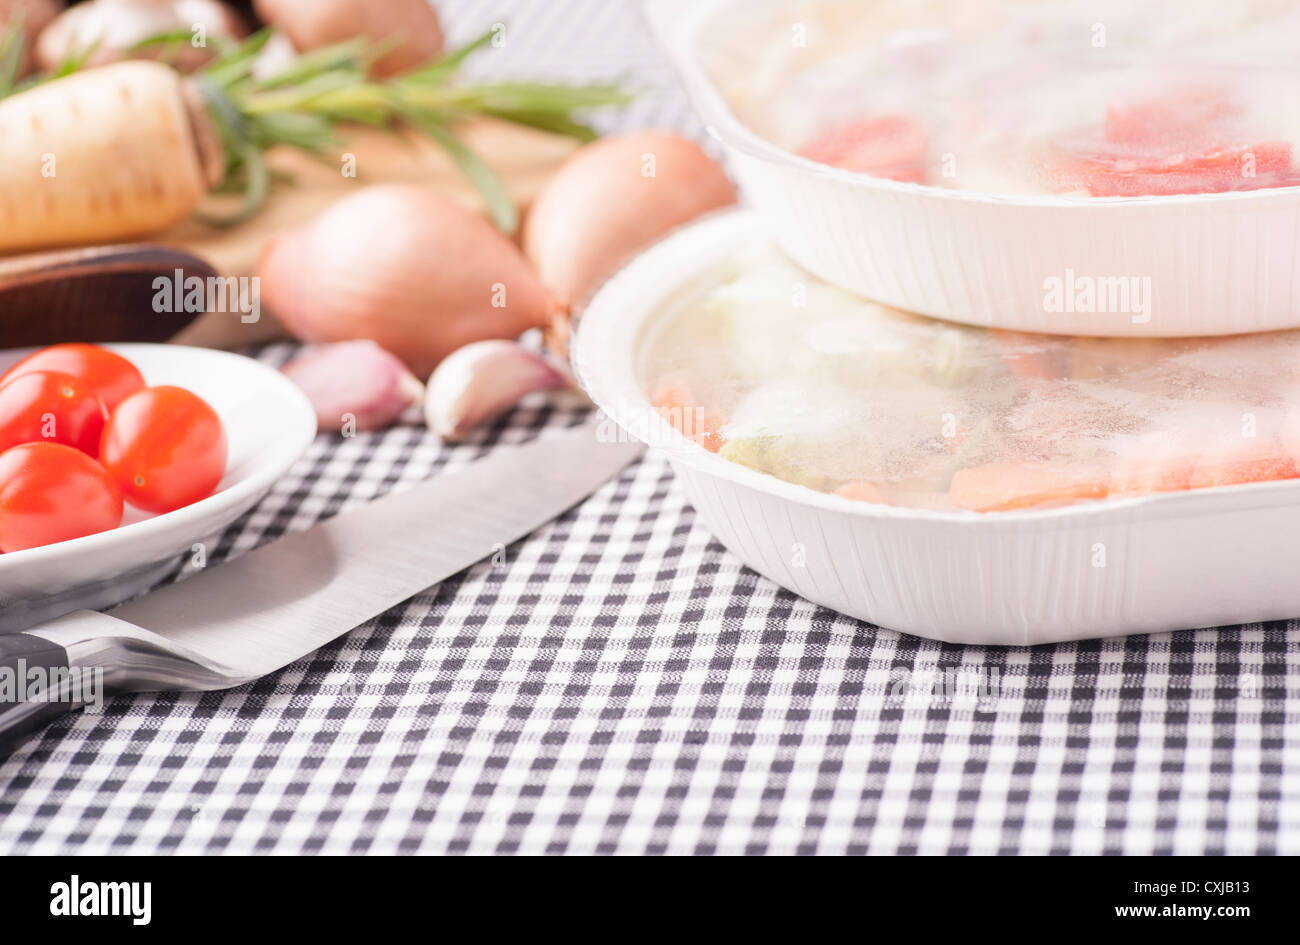 Contrasting food, choice between fresh healthy vegetables and microwave meal Stock Photo